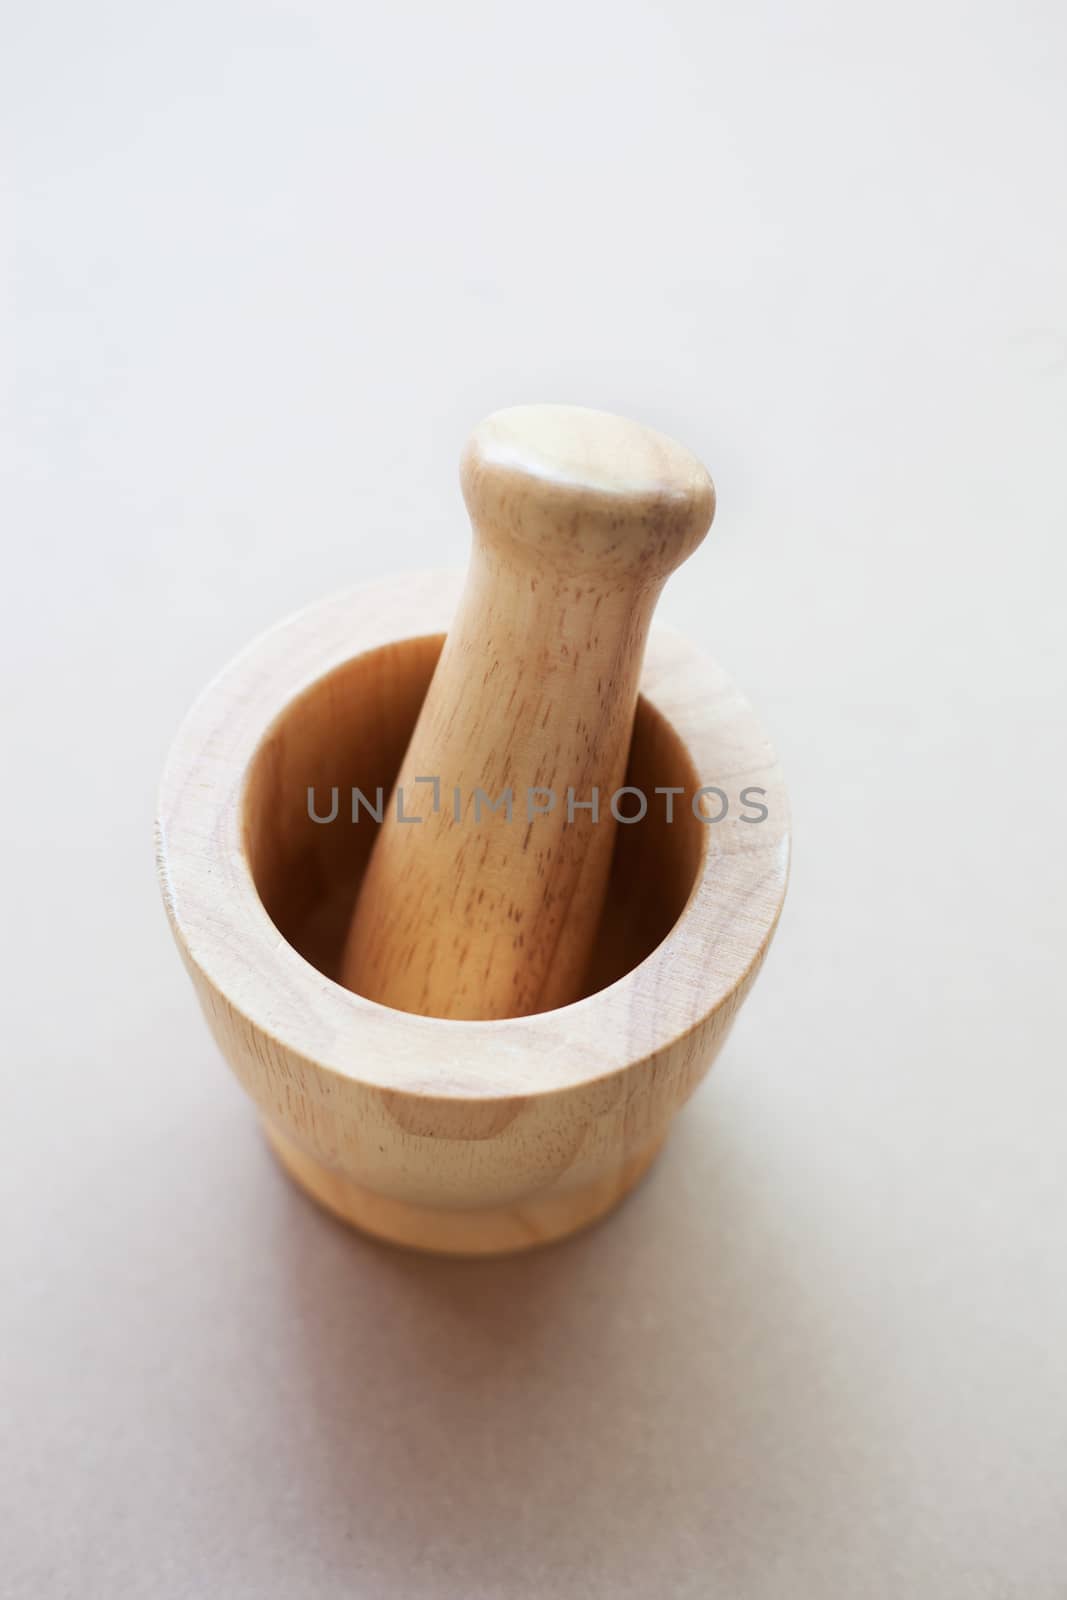 Brown wooden mortar on white background.